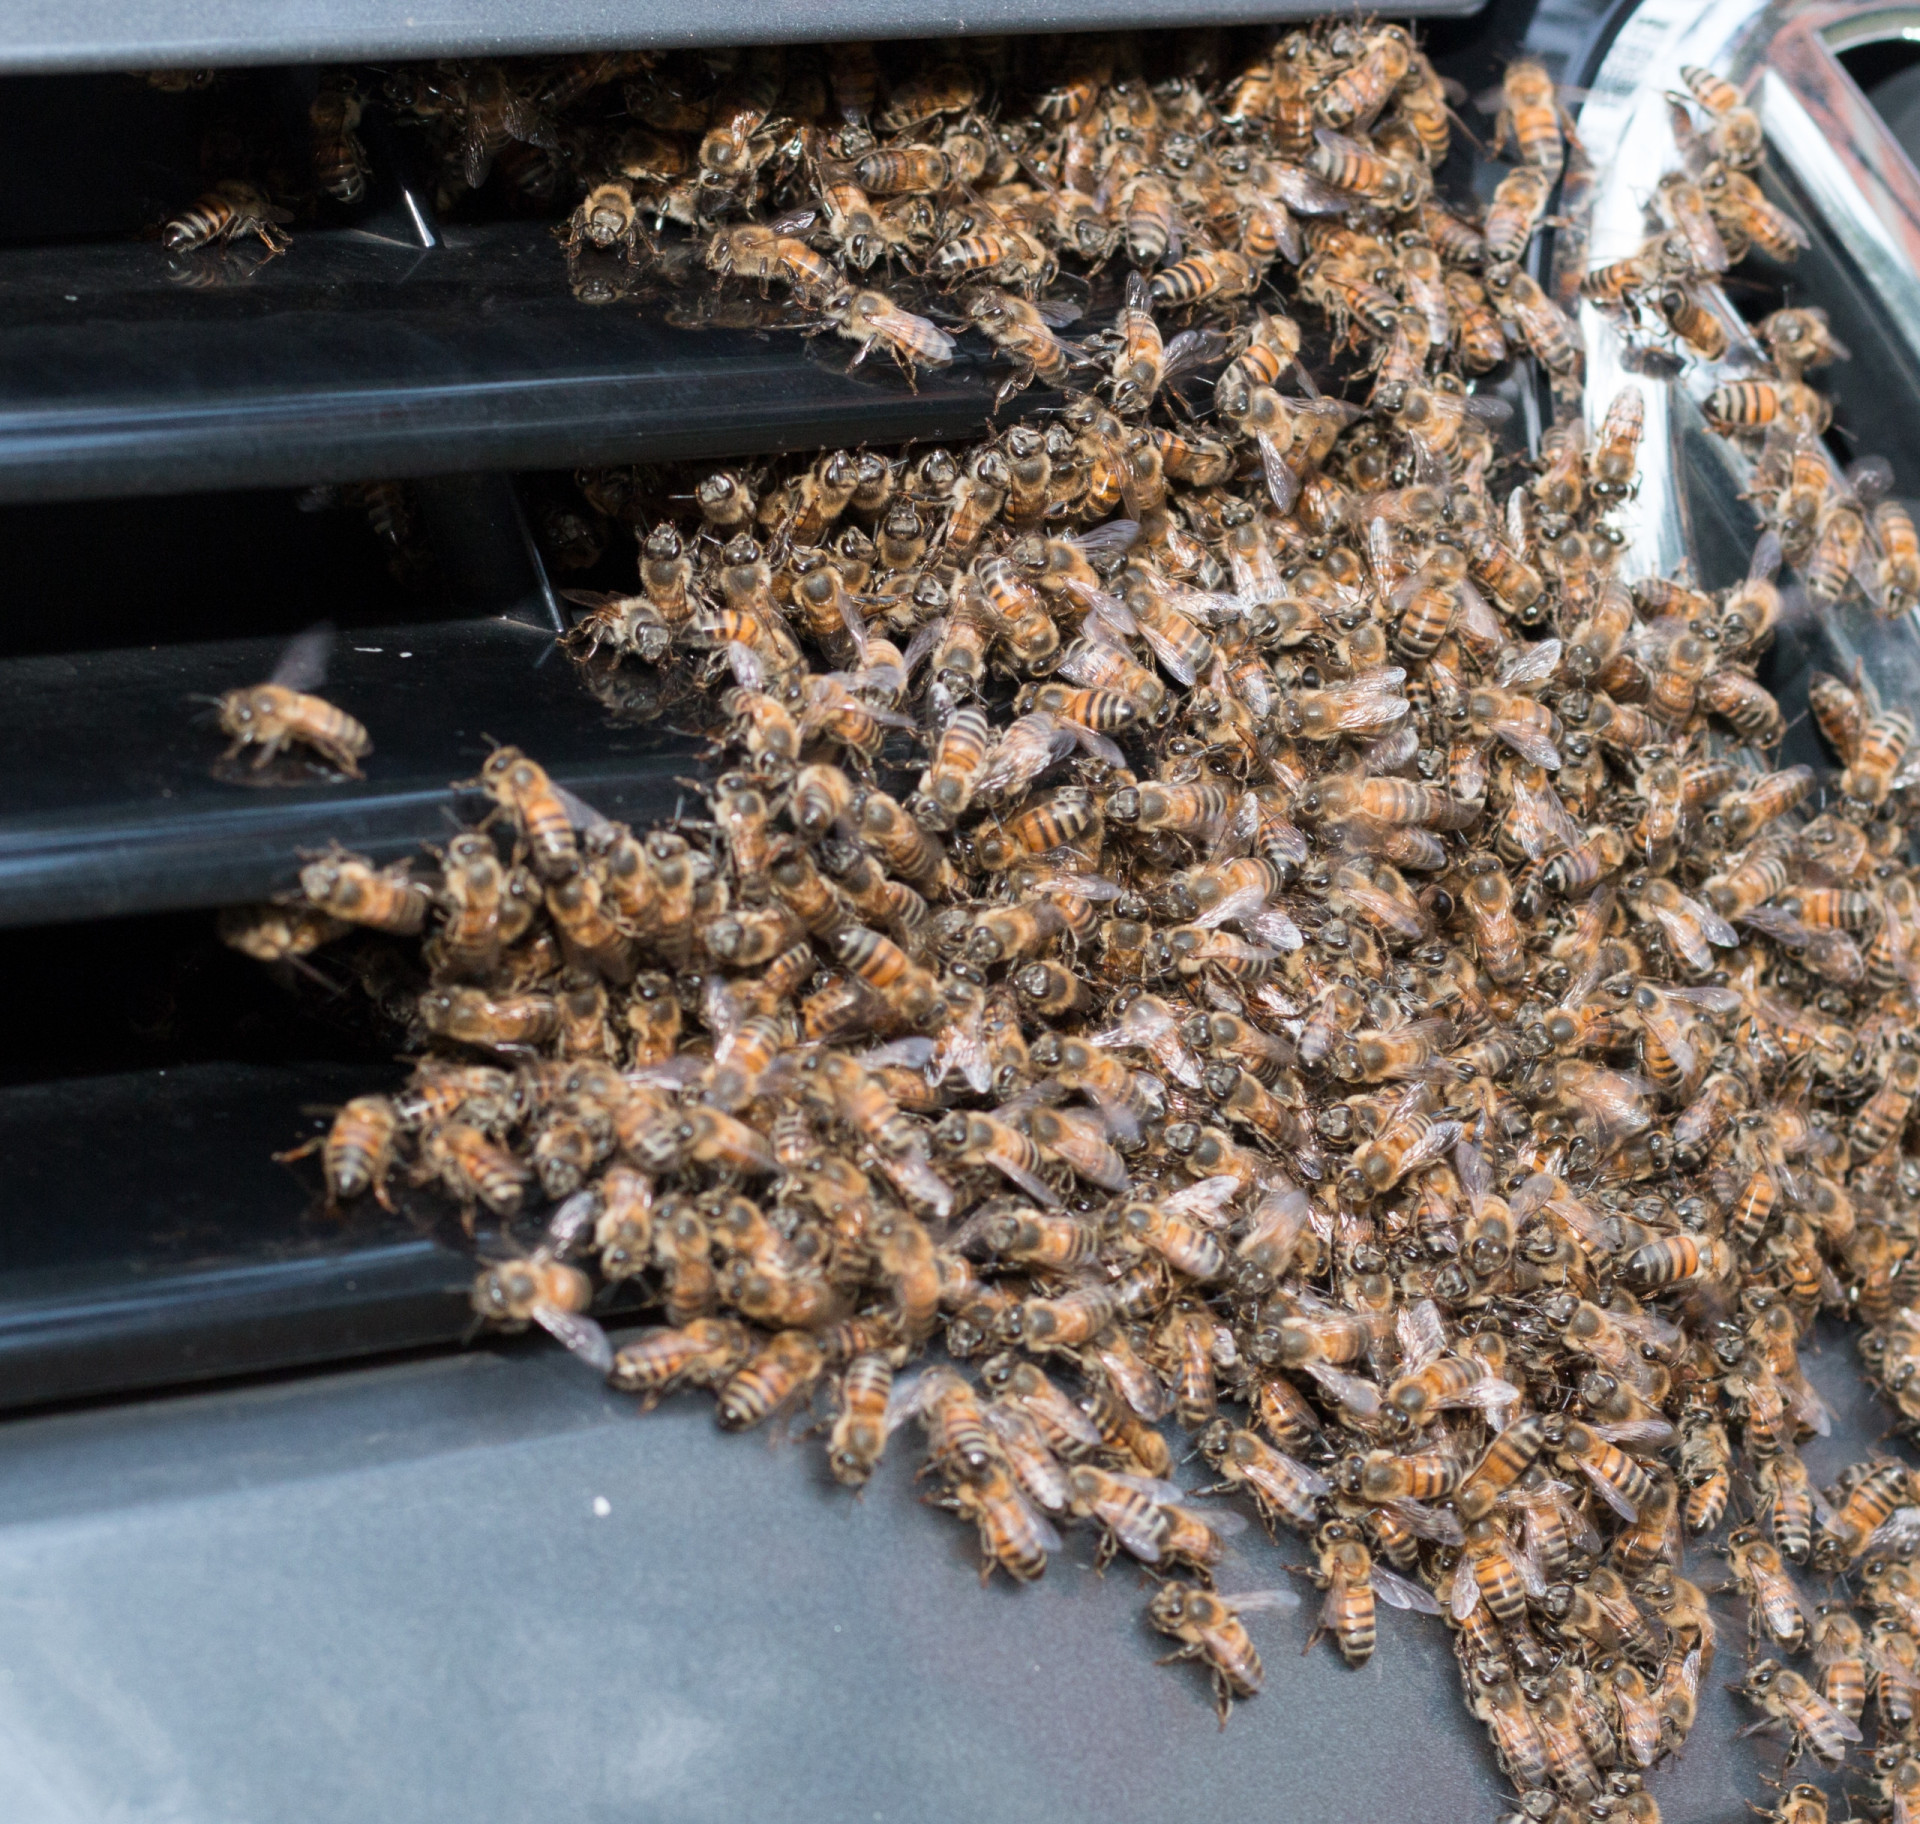 <p>How can one possibly get into a car surrounded by bees, right?</p><p>You may also like:<a href="https://www.starsinsider.com/n/194952?utm_source=msn.com&utm_medium=display&utm_campaign=referral_description&utm_content=528401v1en-sg"> You won't believe these celebrity couples met on blind dates</a></p>